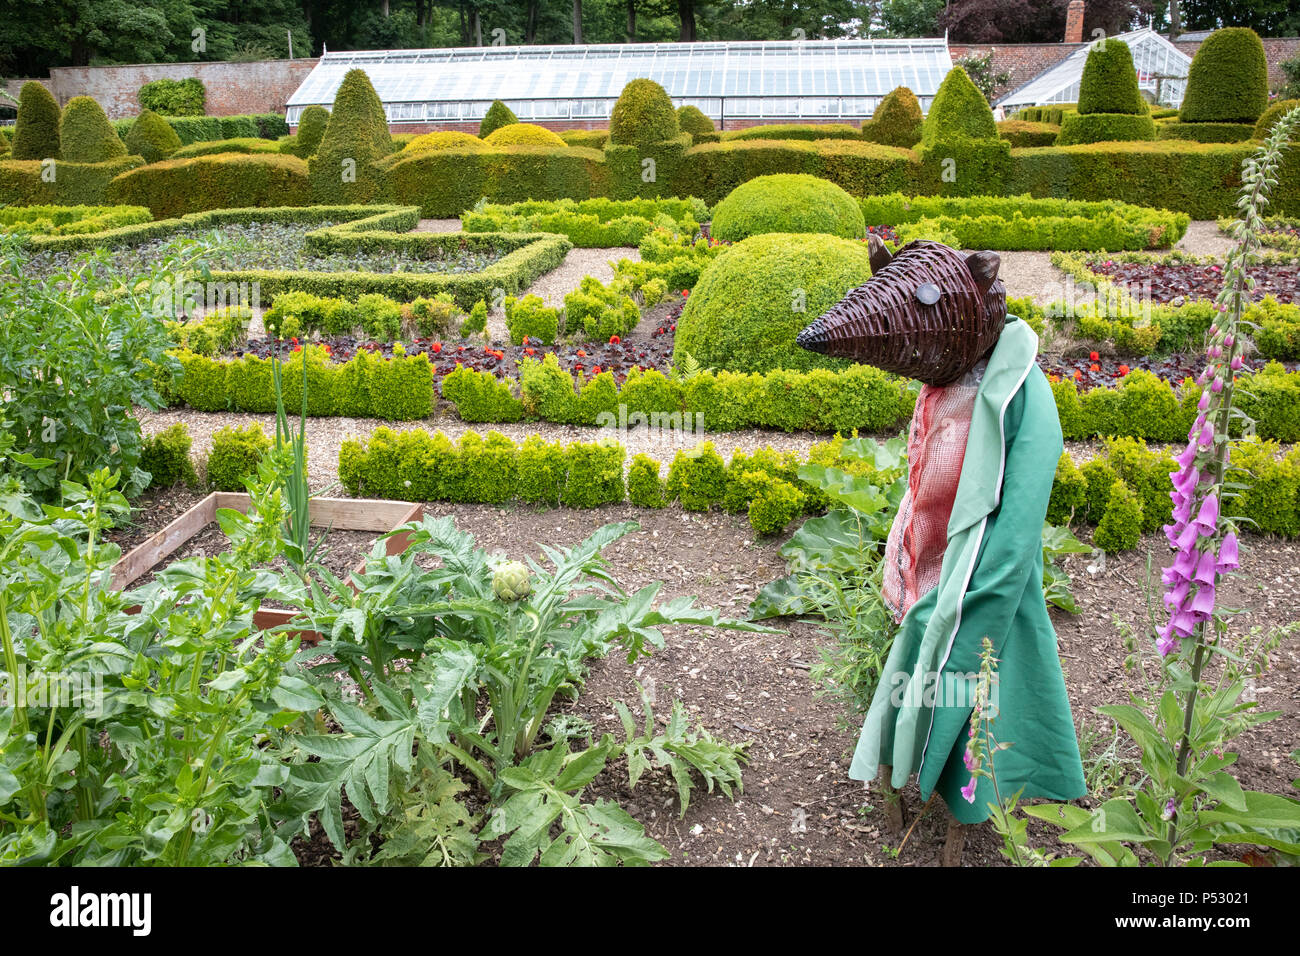 The gardens at Sewerby House, Near Bridlington, Uk Stock Photo